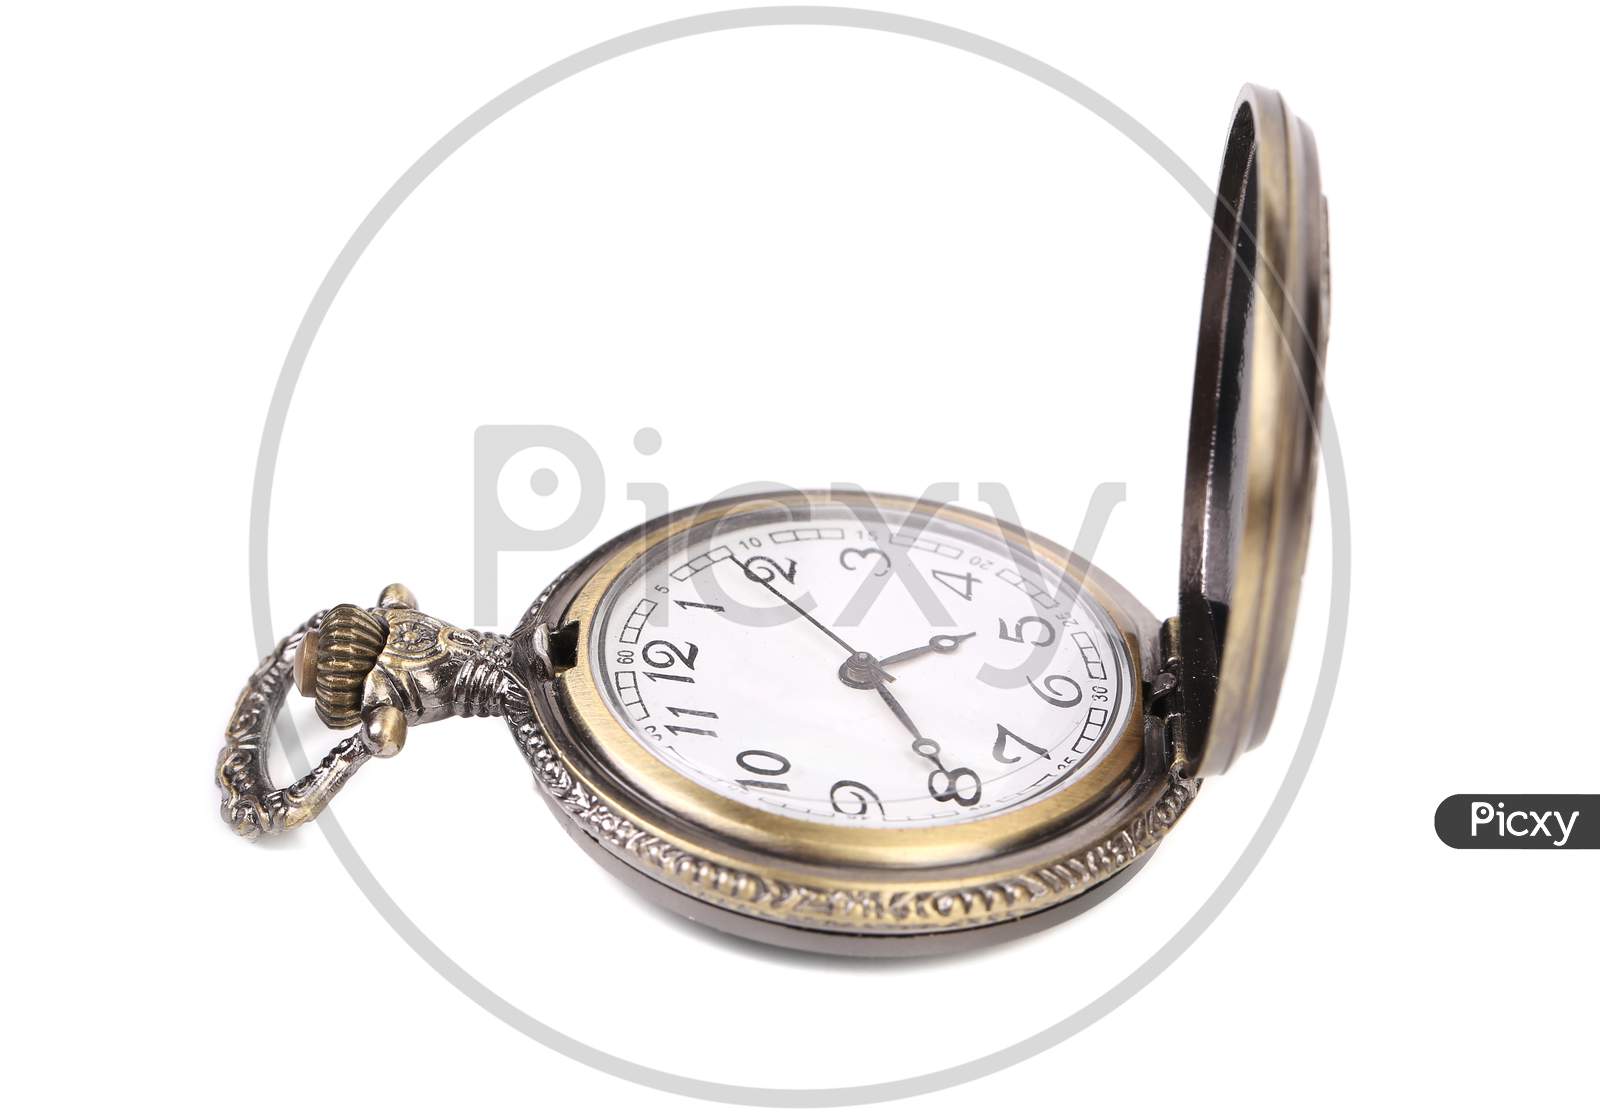 Vintage Pocket Watch. Isolated On A White Background.